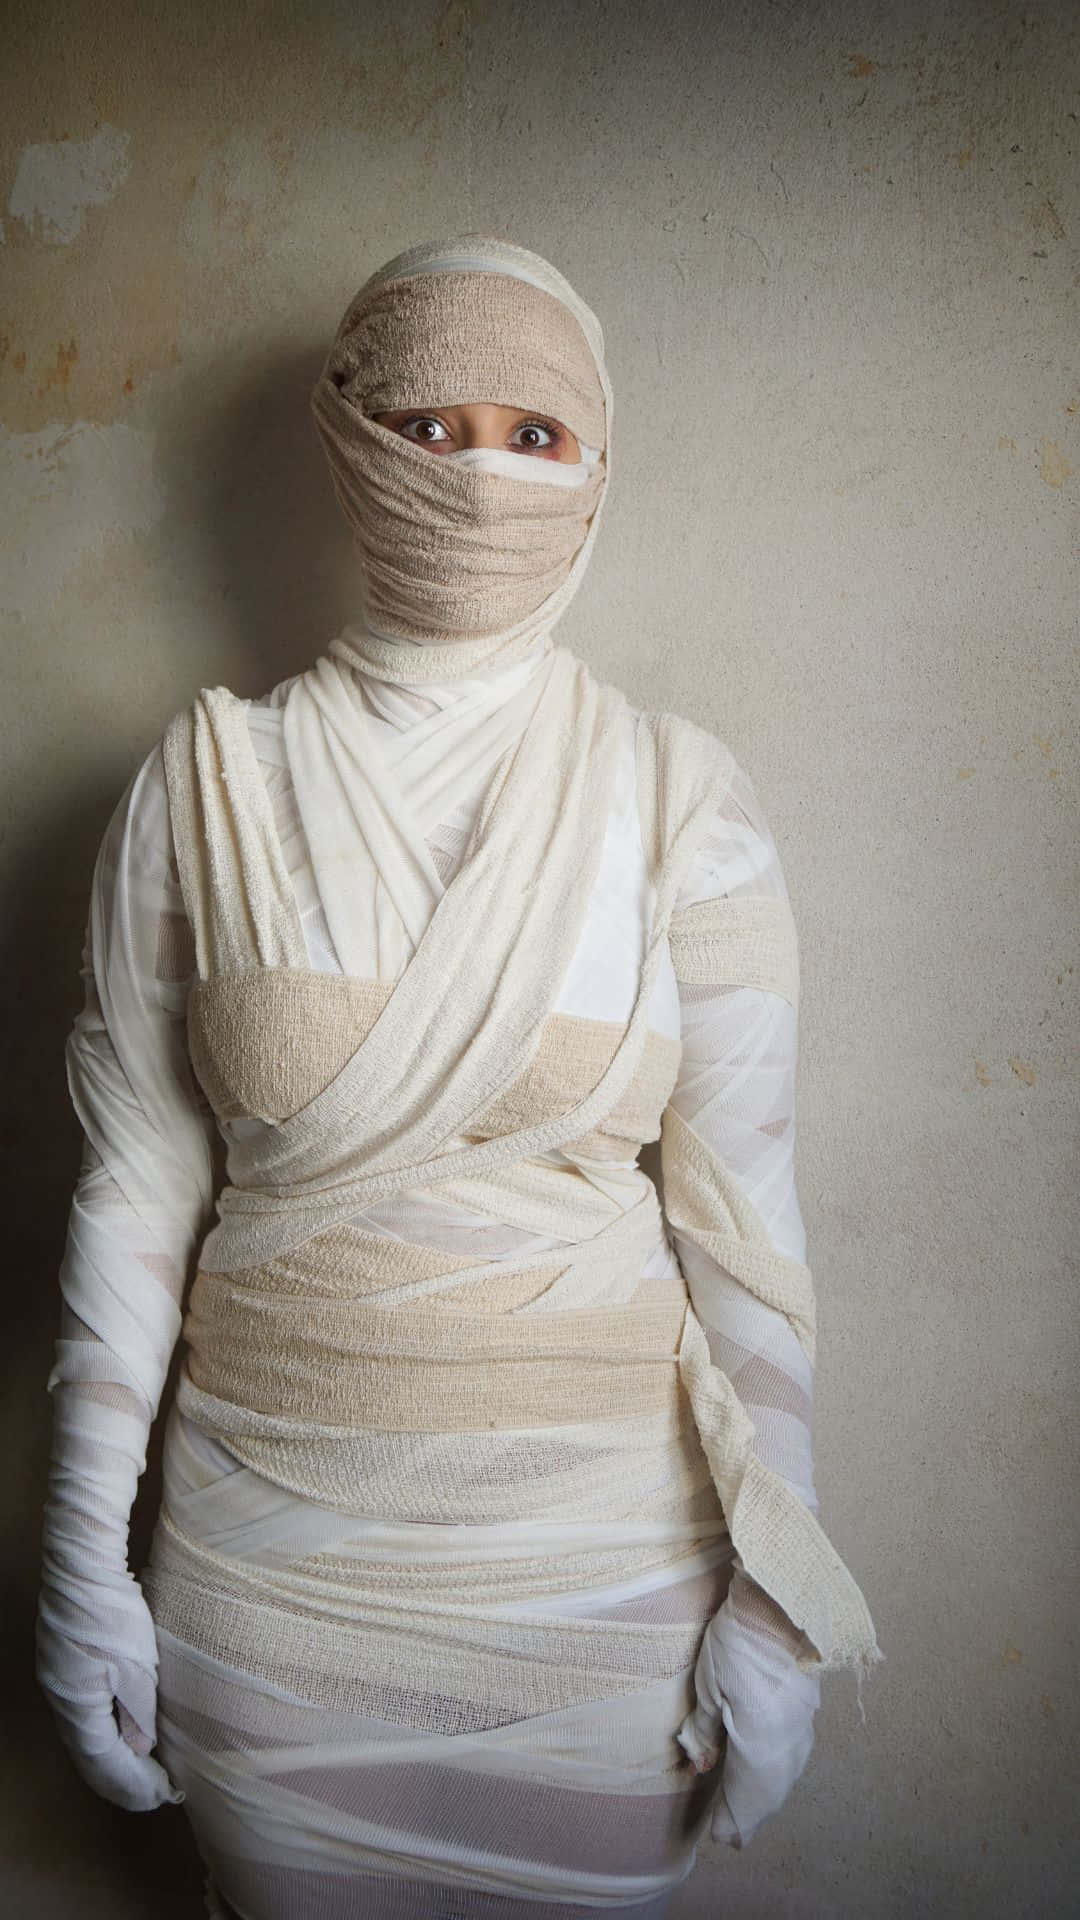 Spice up your party with stylish and spooky mummy costumes. Wallpaper